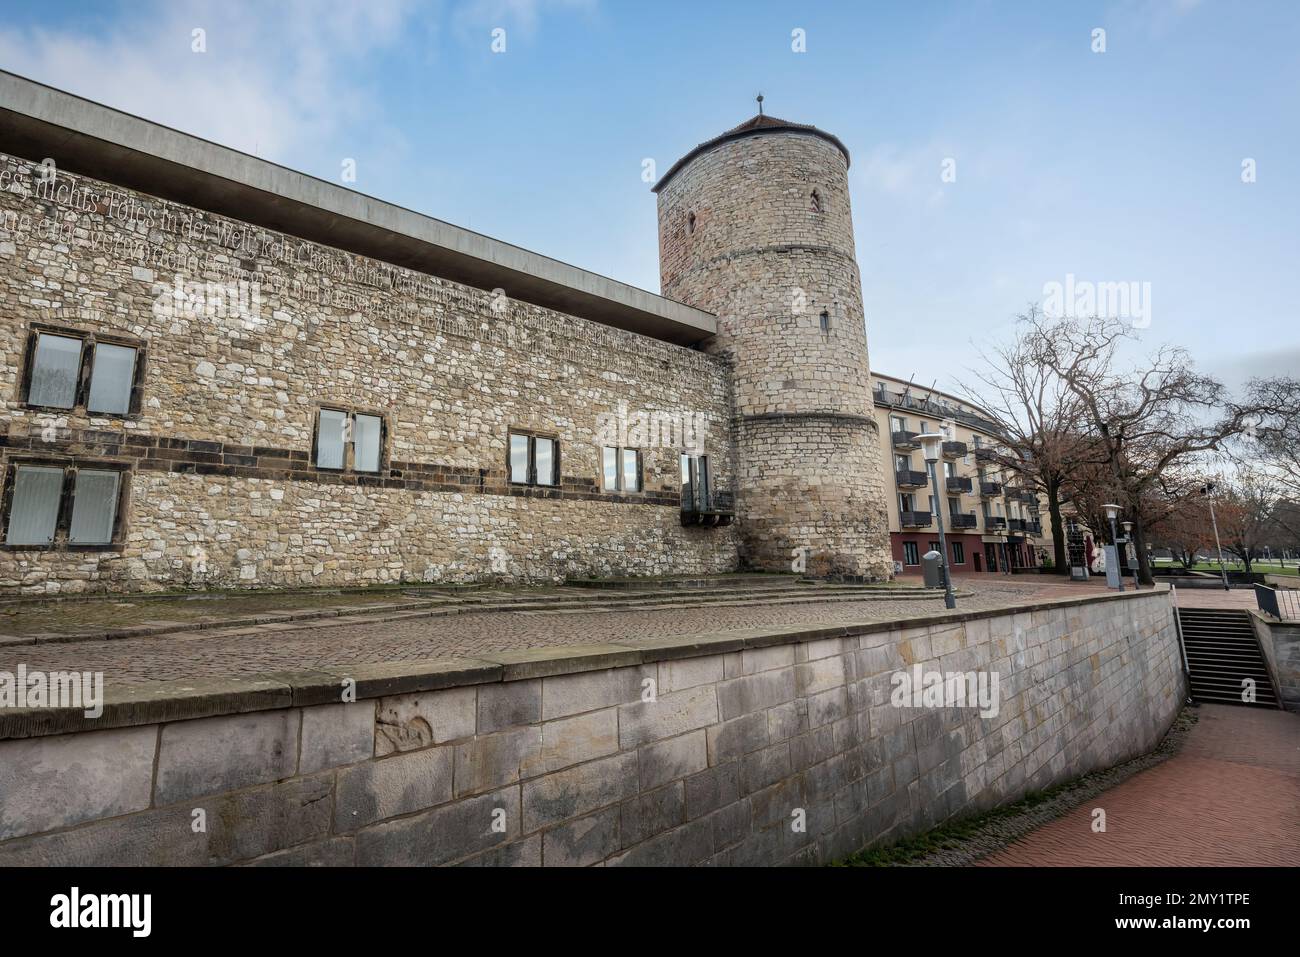 Arsenal on the High Bank (Zeughaus) and Beguine Tower (Beginenturm) - Hanover, Lower Saxony, Germany Stock Photo